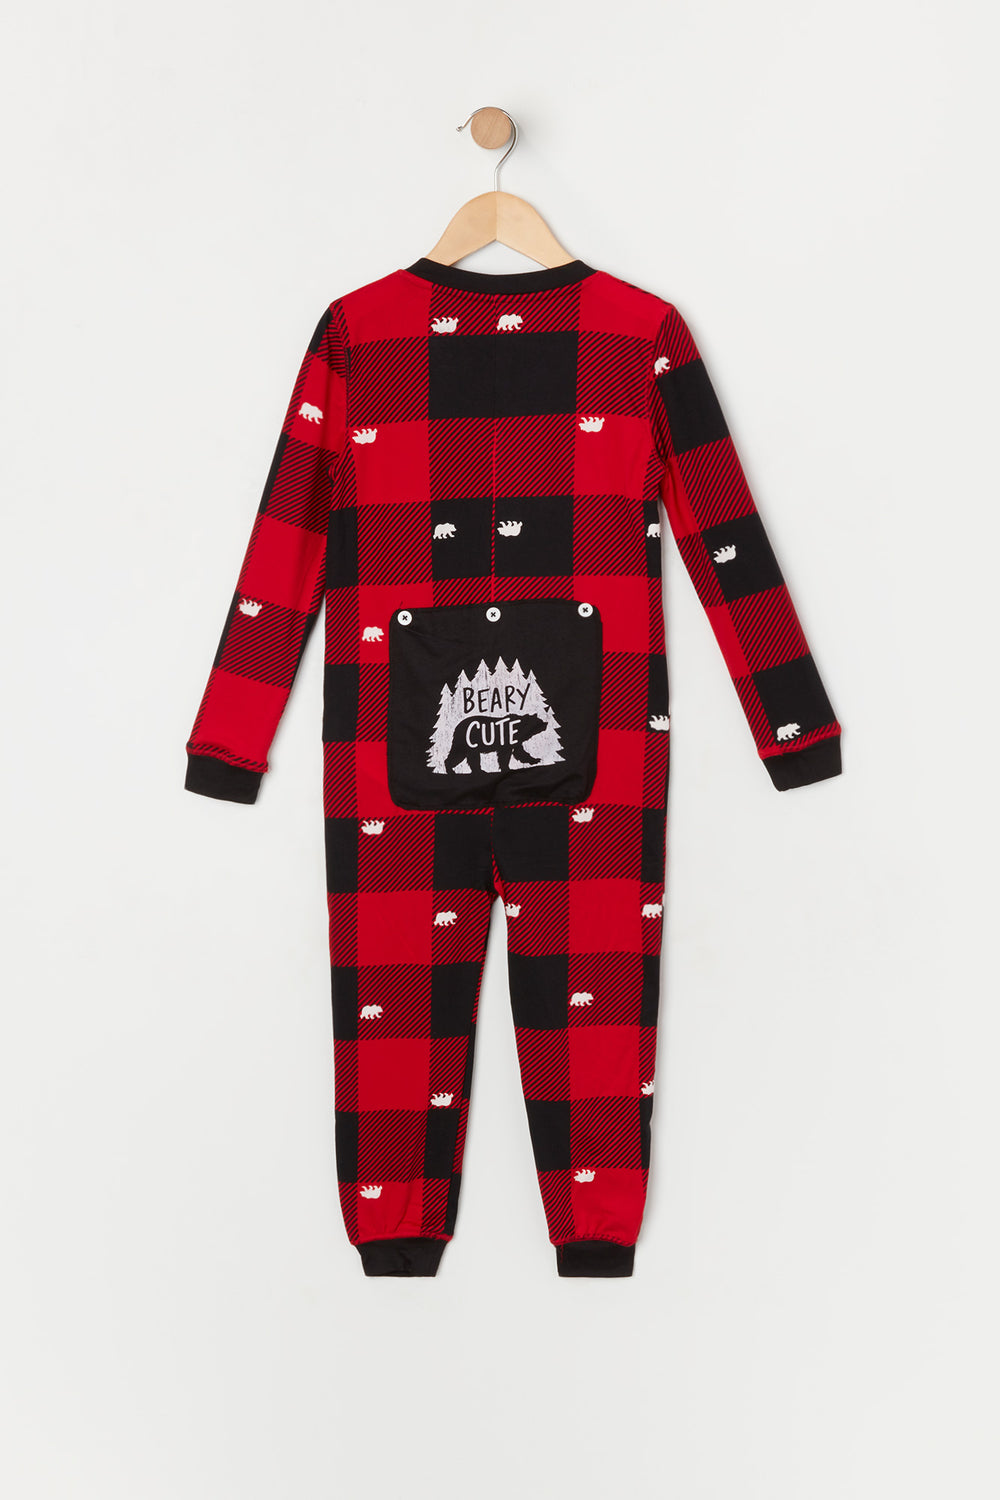 Toddler Matching the Family Bear Onesie Toddler Matching the Family Bear Onesie 2